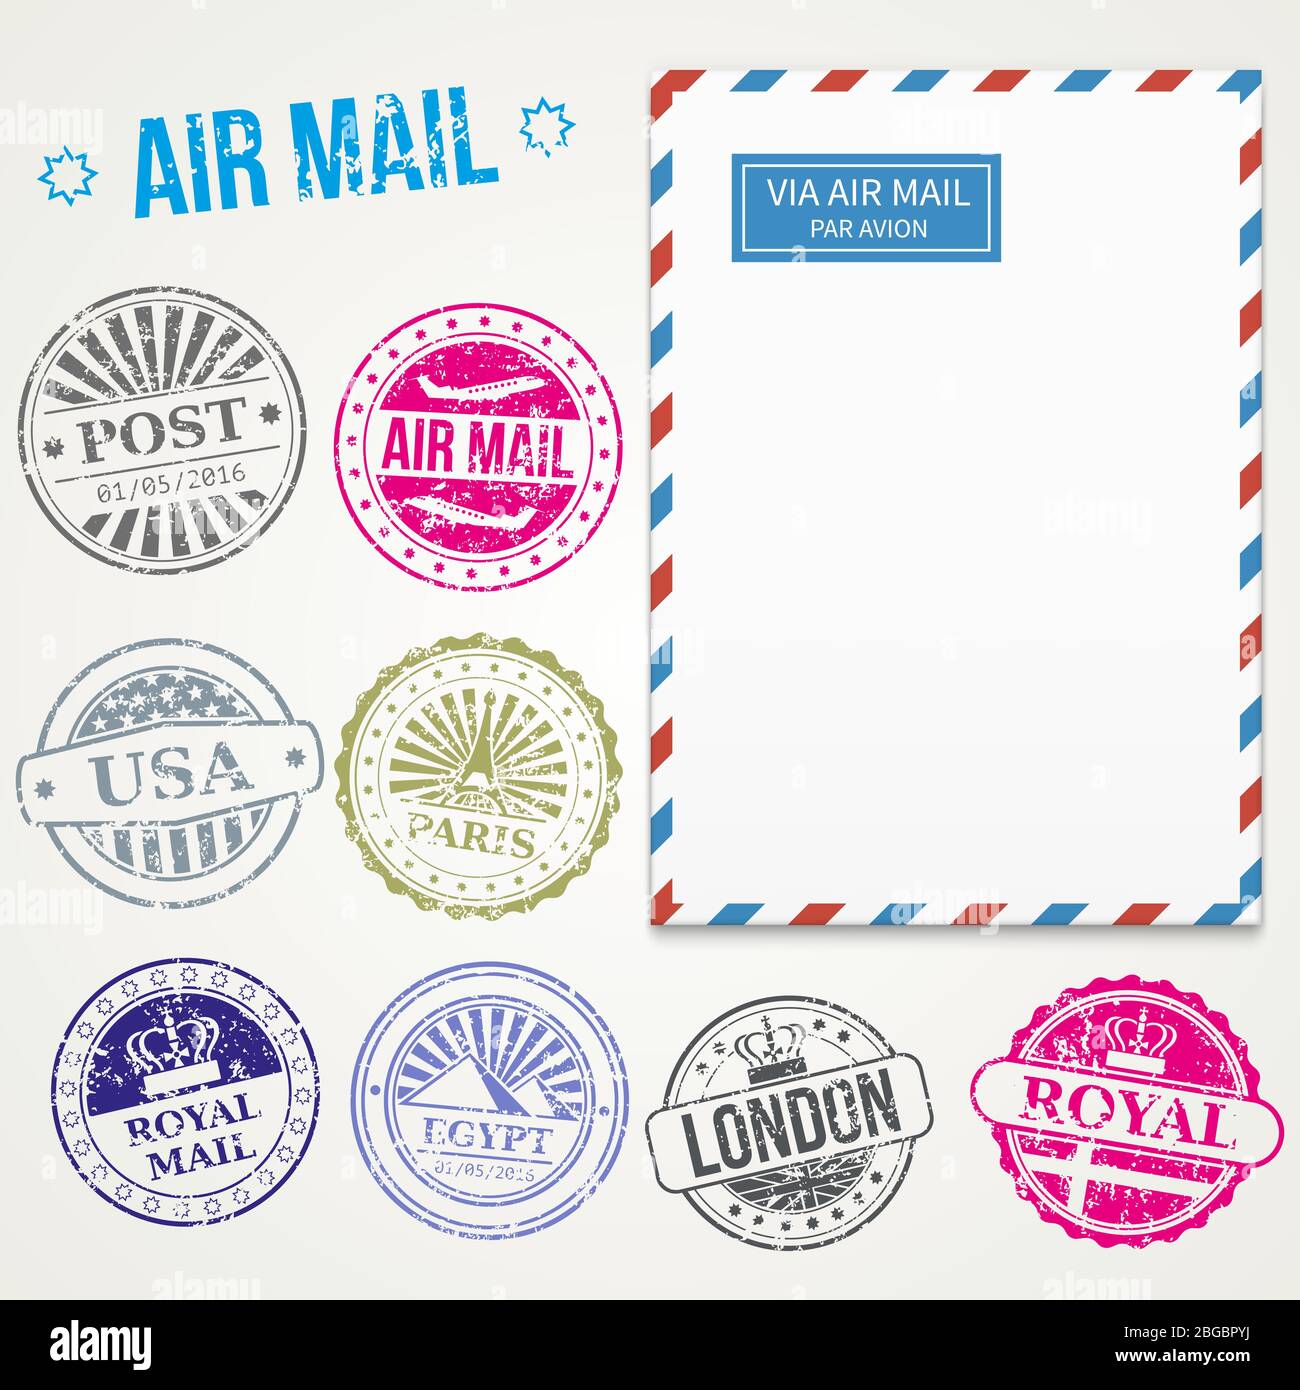 Air mail stamps and envelope vector. Postage vintage delivery illustration Stock Vector